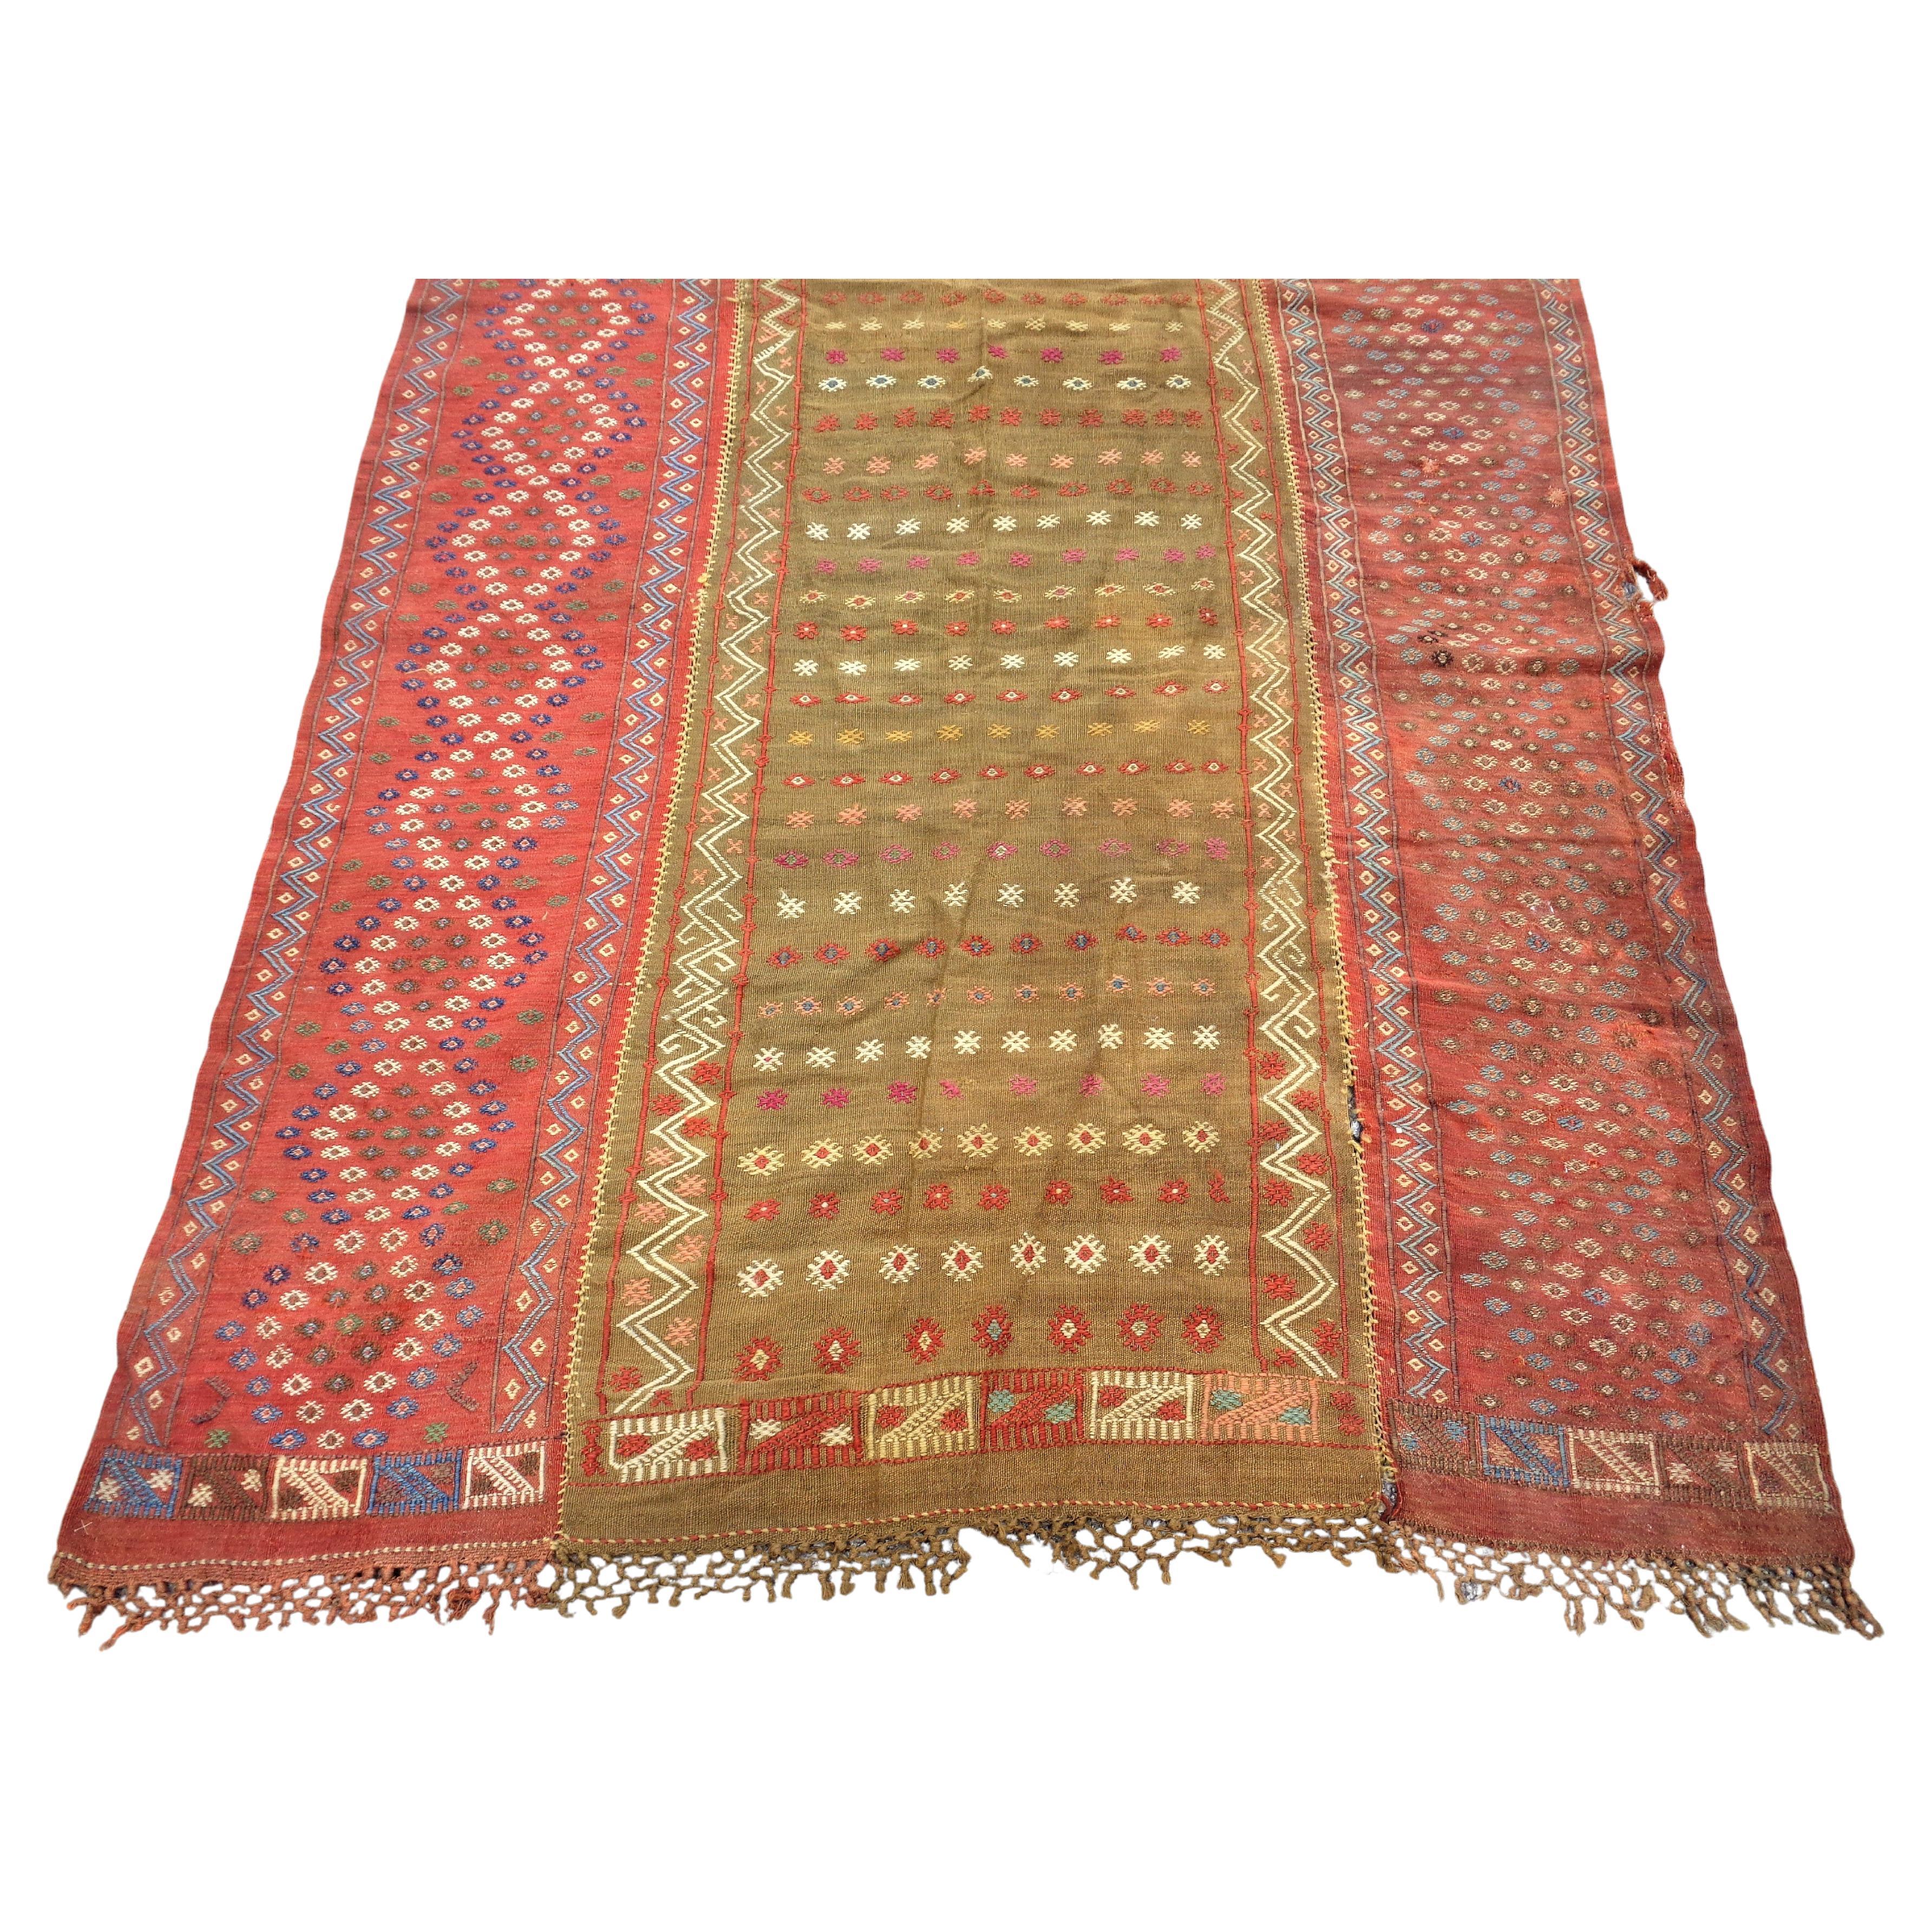 Antique nomadic Turkish kilim long rug runner. Hand woven / sewn together three panels ( central field / two borders ) beautifully aged all natural vegetal dye colors. A genuine antique tribal rug, not a commercially made piece that was intended for